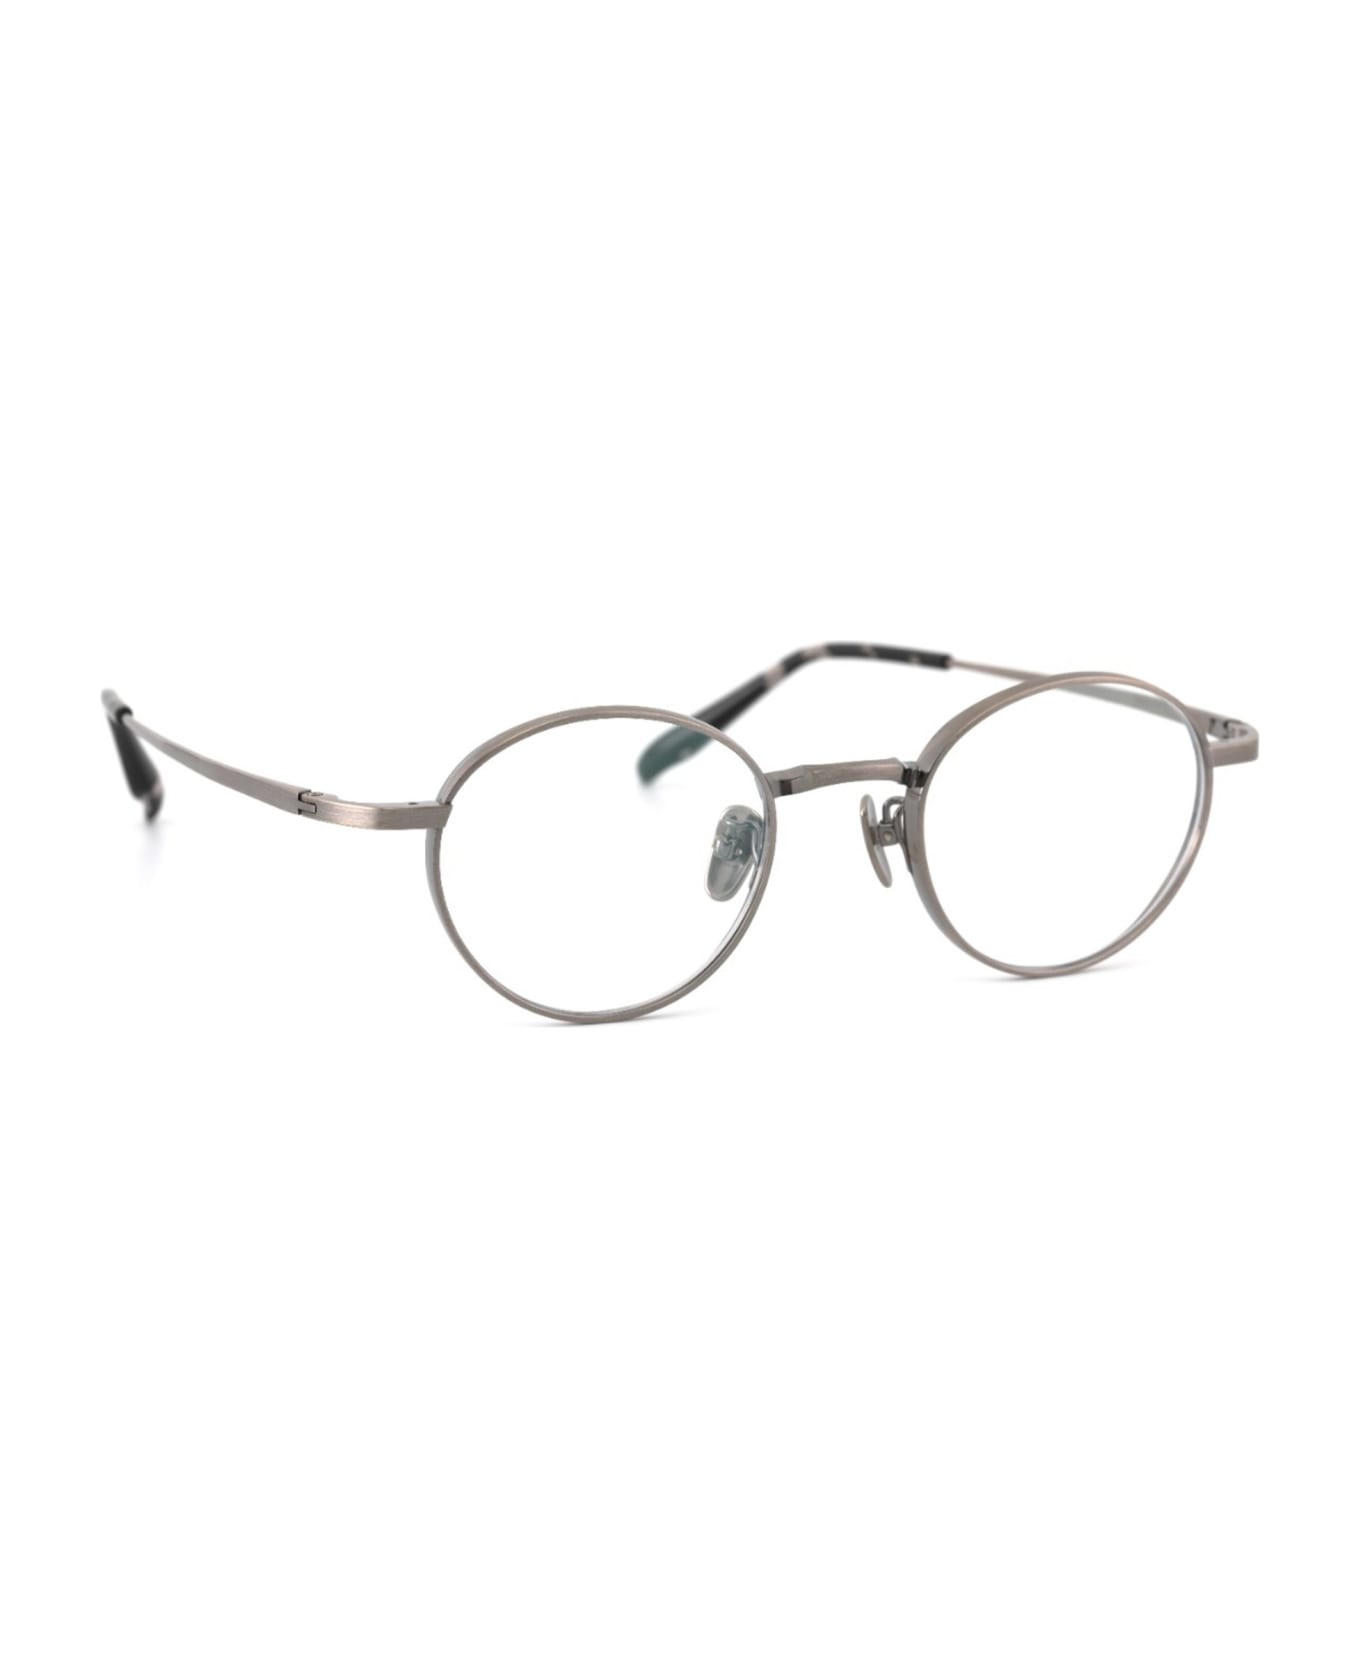 FACTORY900 Titanos X Factory900 Mf-003 - Silver Rx Glasses - brushed silver